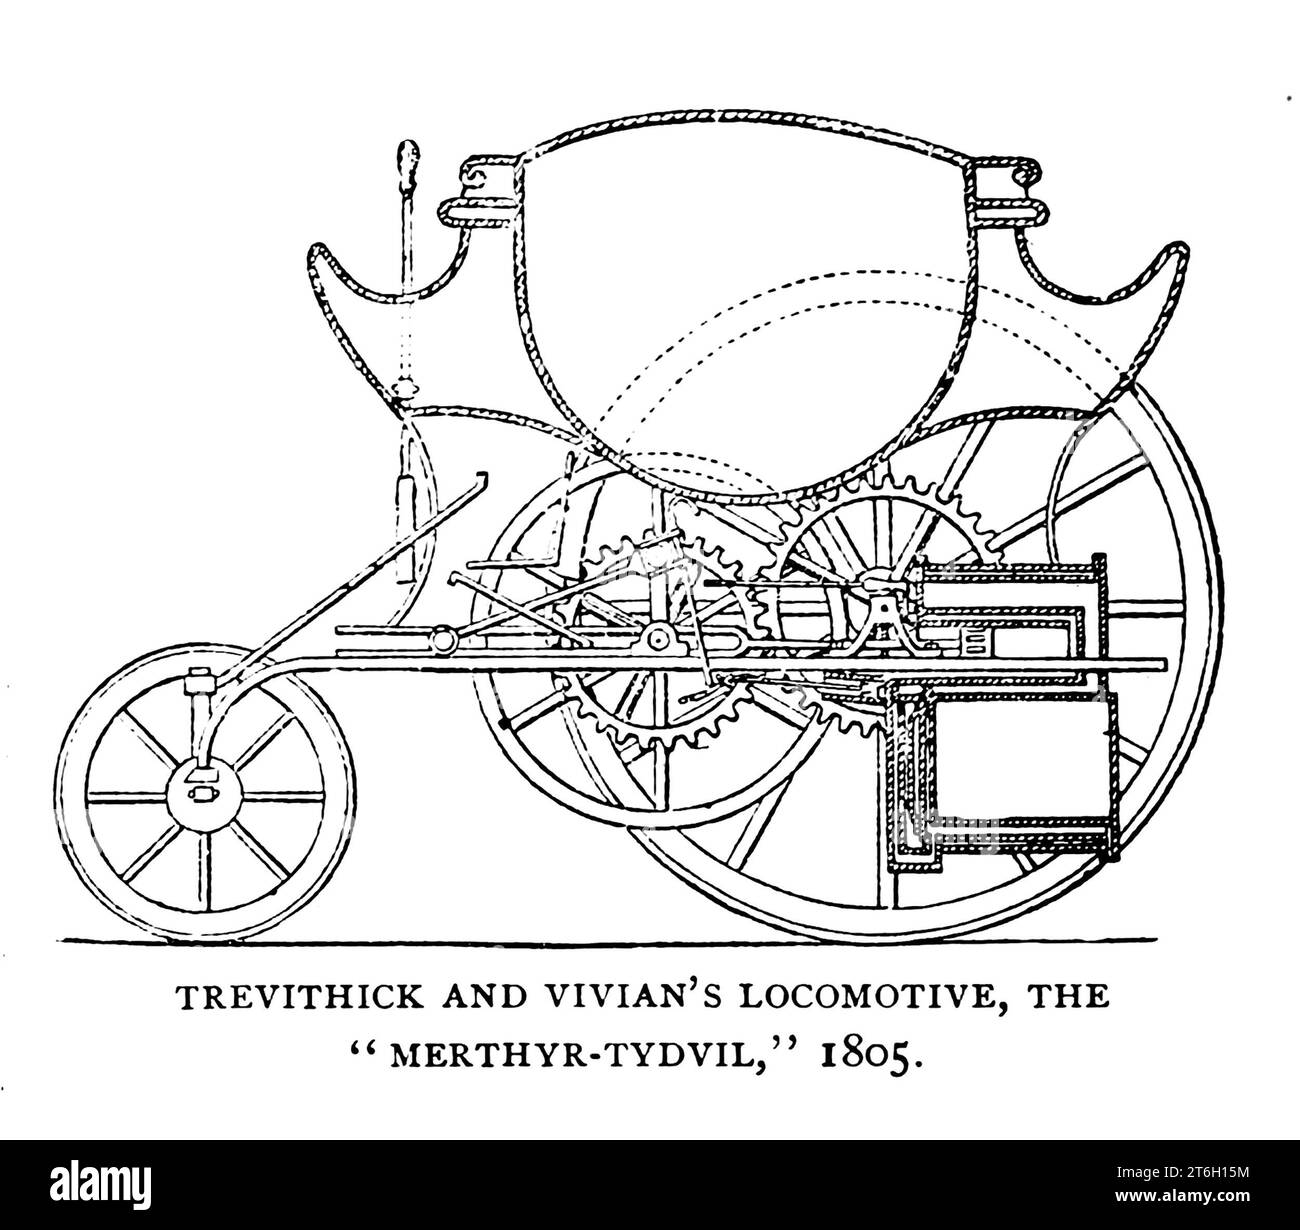 TREVITHICK AND VIVIAN'S LOCOMOTIVE, THE ' MERTHYR-TYDFIL,' 1805. from the Article PIONEER LOCOMOTIVES IN ENGLAND AND AMERICA. By Alfred Mathews. from The Engineering Magazine DEVOTED TO INDUSTRIAL PROGRESS Volume XII October 1896 to March 1897 The Engineering Magazine Co Stock Photo